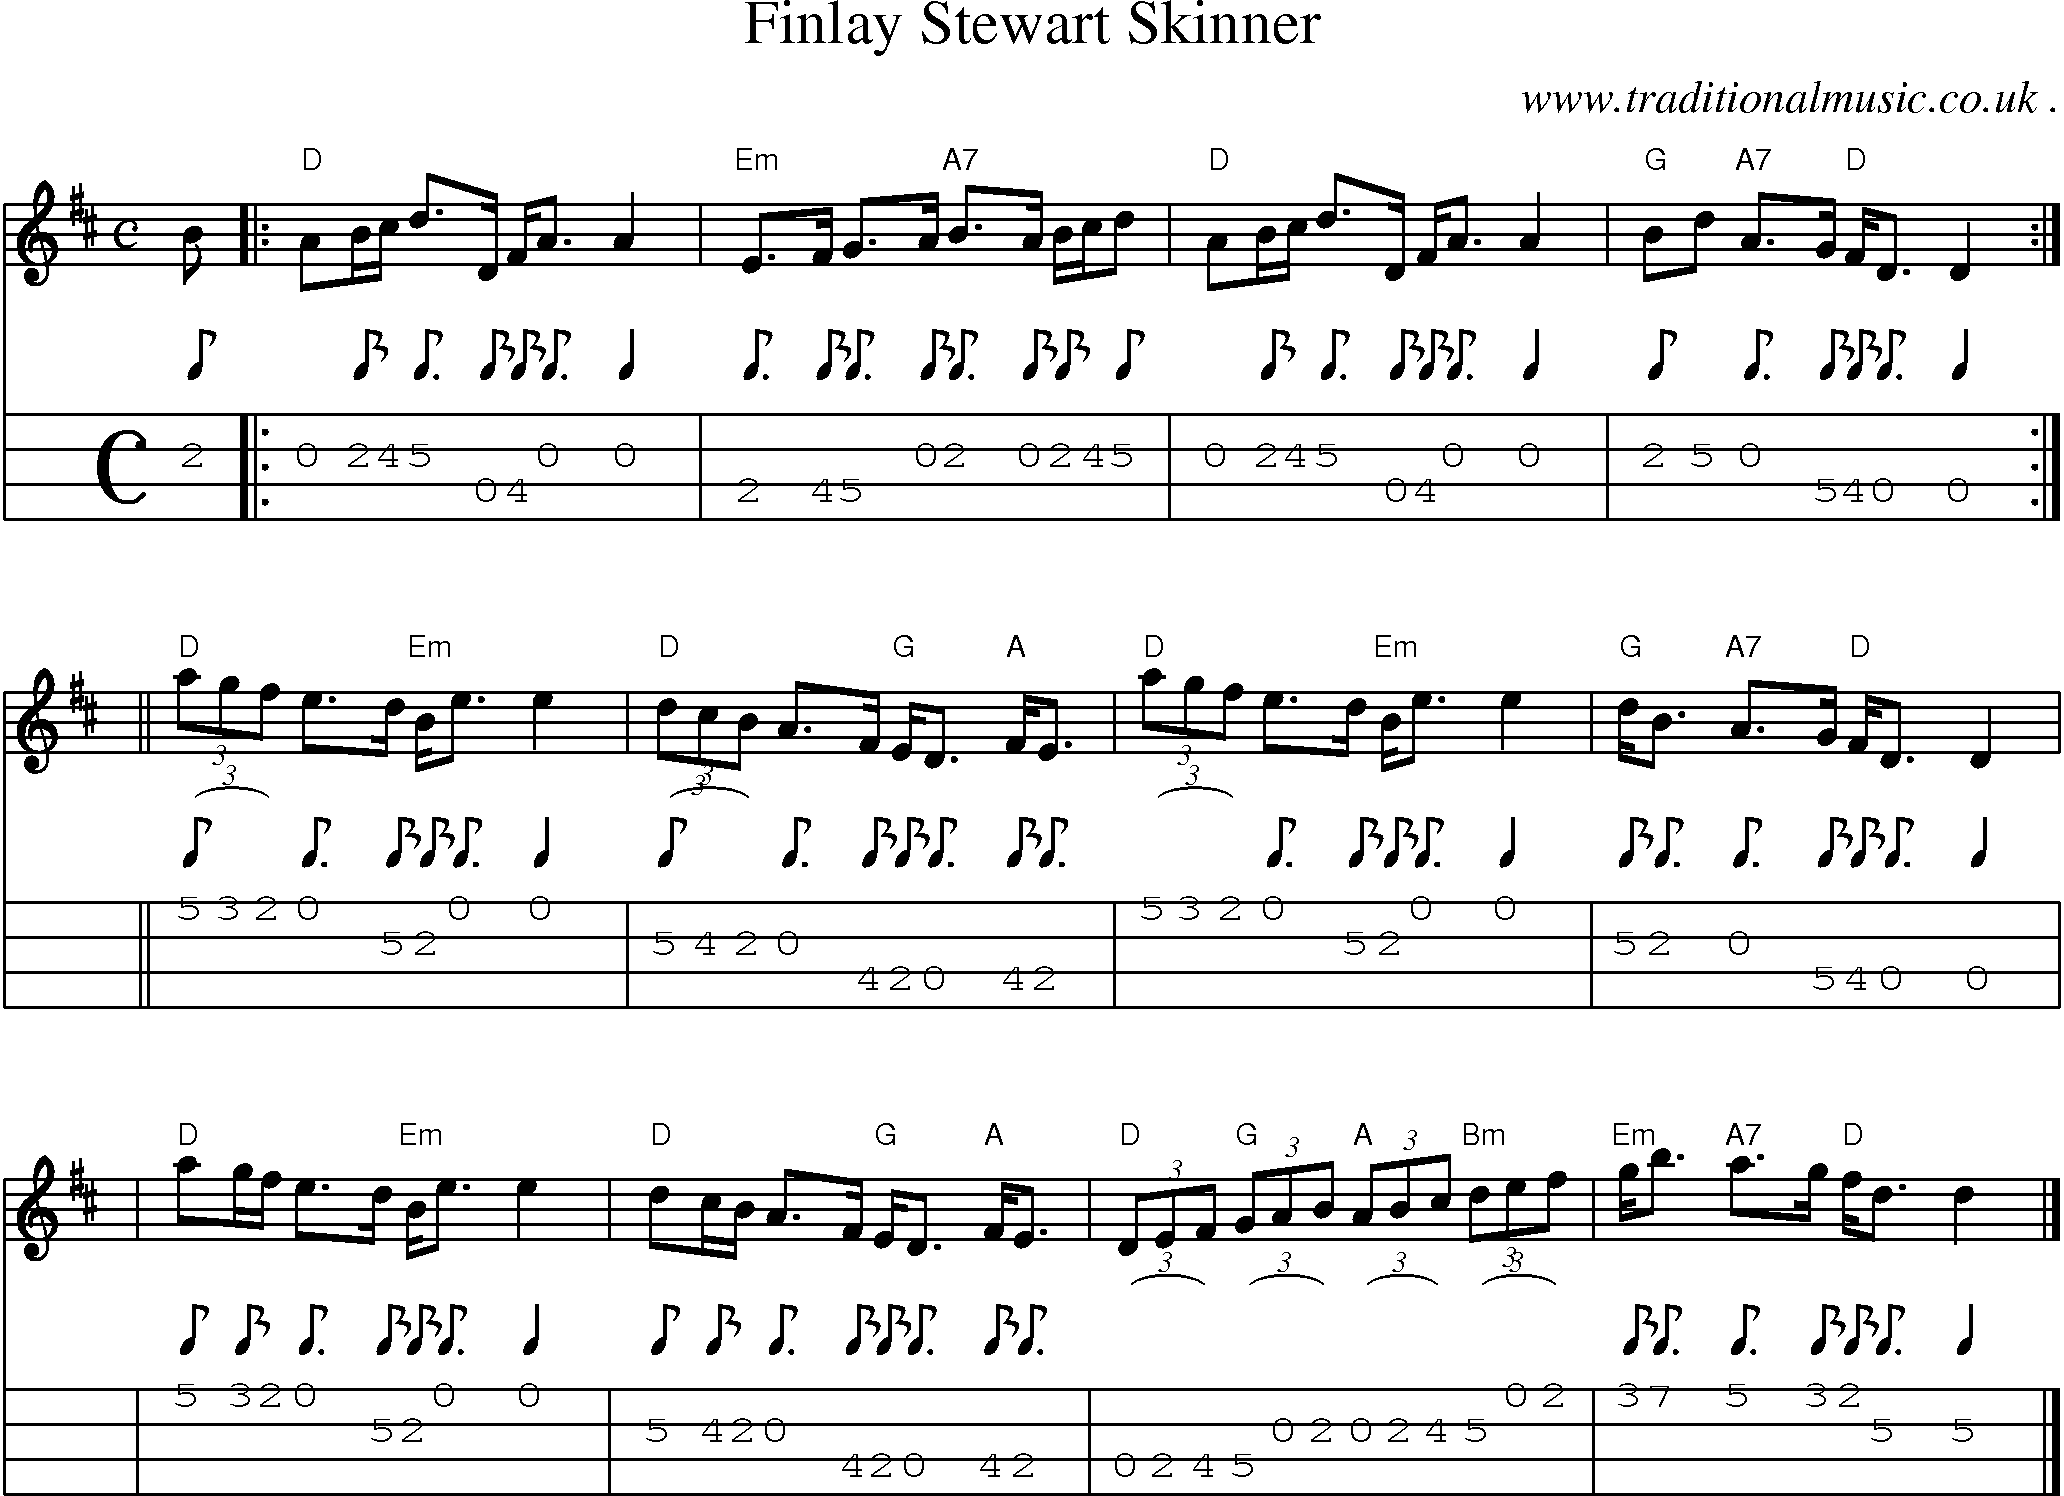 Sheet-music  score, Chords and Mandolin Tabs for Finlay Stewart Skinner